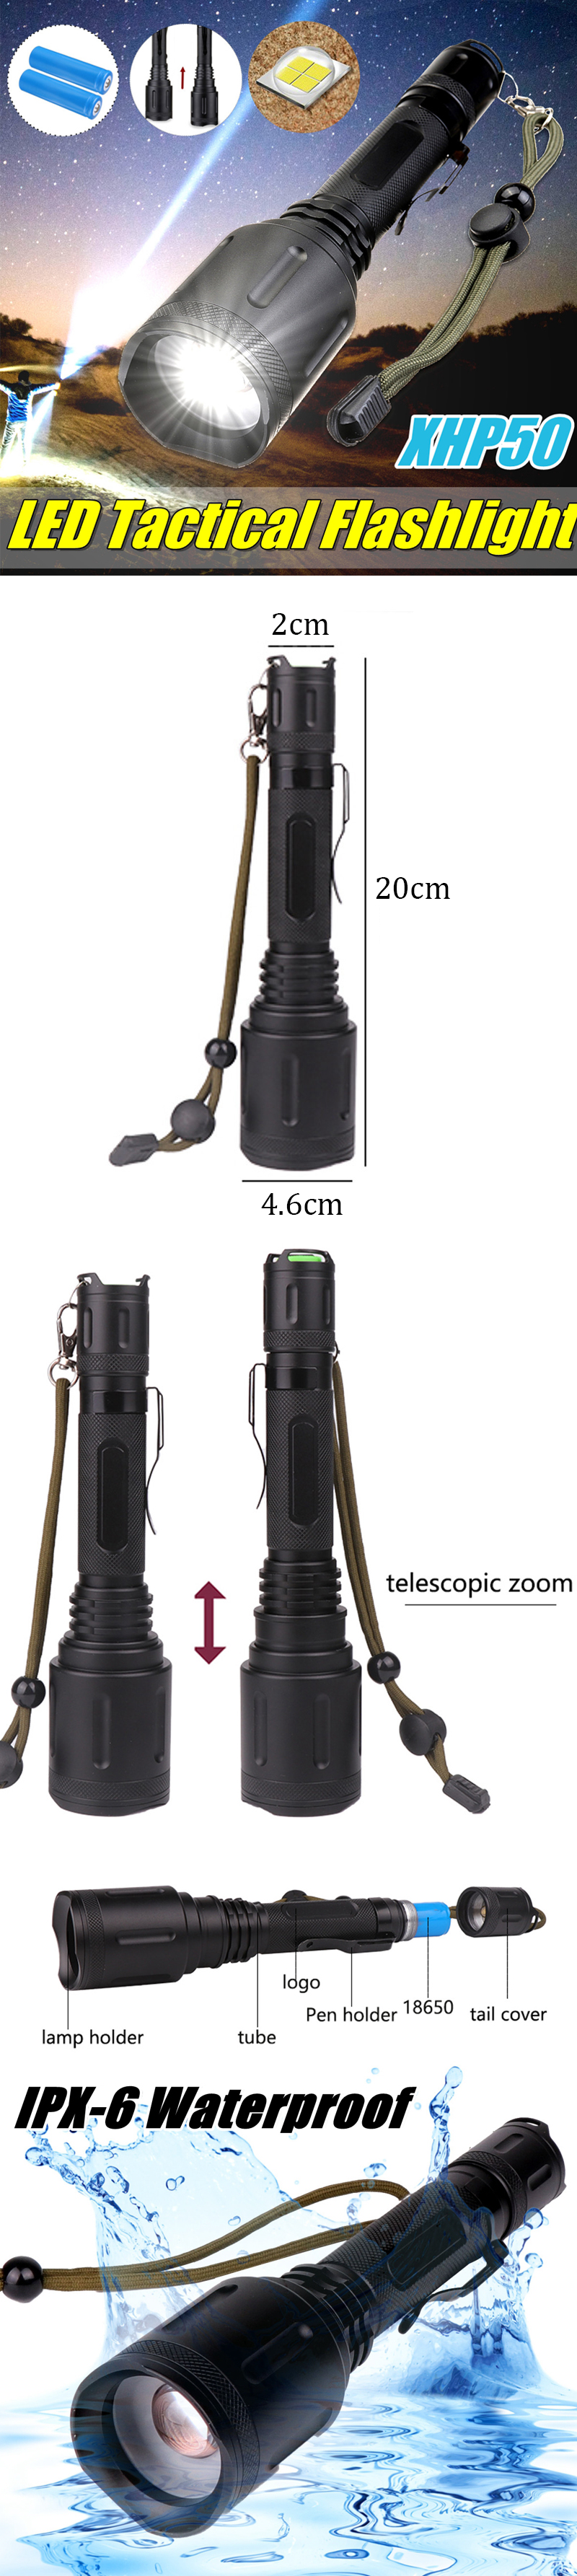 9000LM-XHP50-Tactical-LED-Zoomable-Flashlight-1420653